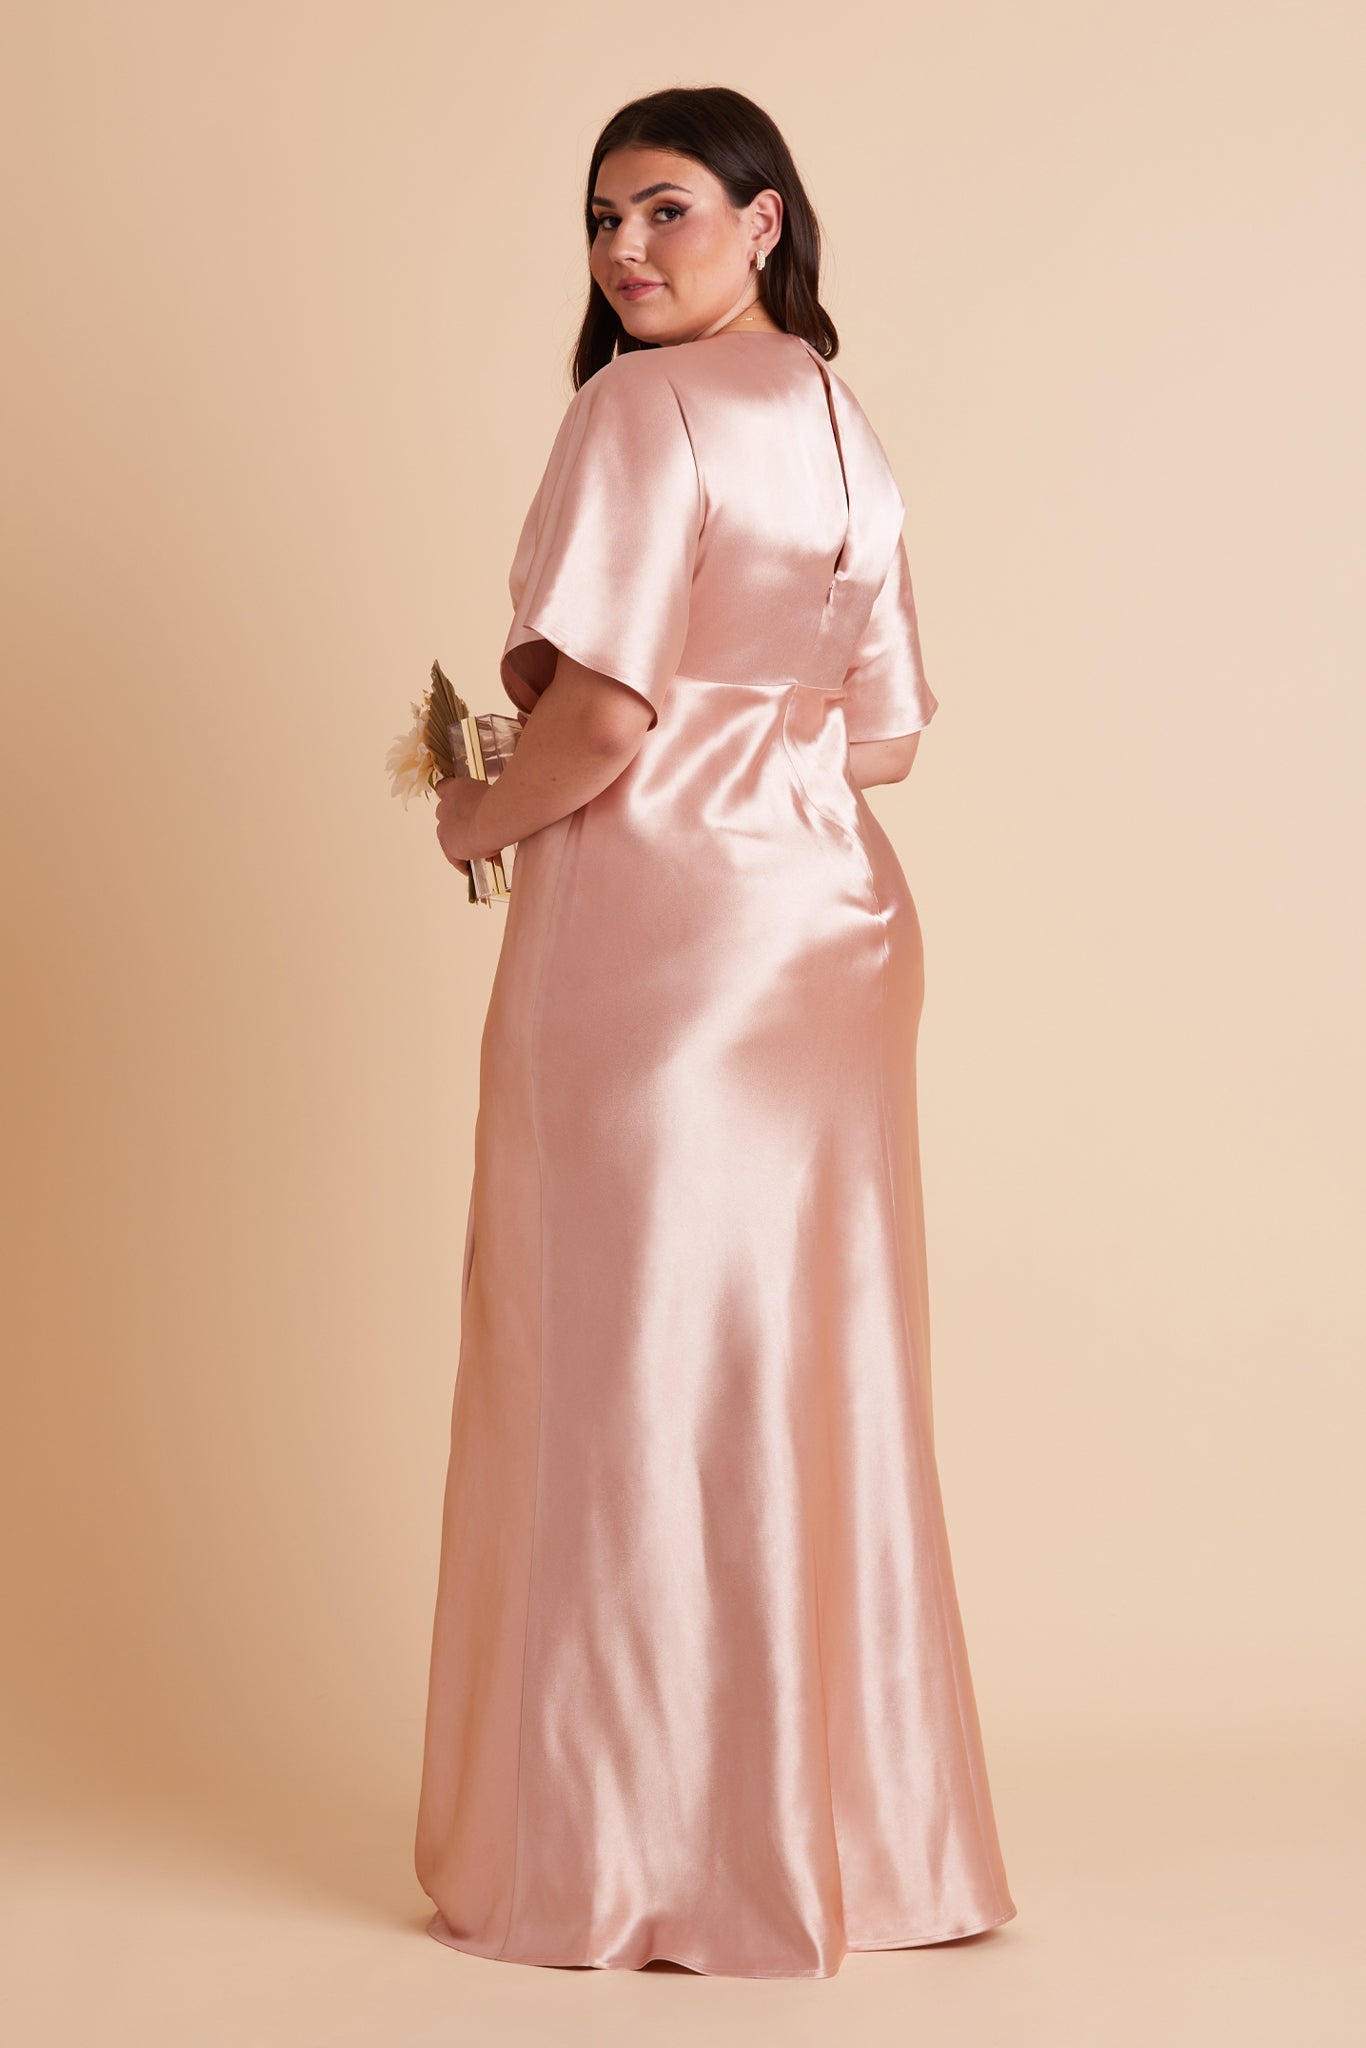 Jesse plus size bridesmaid dress in rose gold satin by Birdy Grey, back view